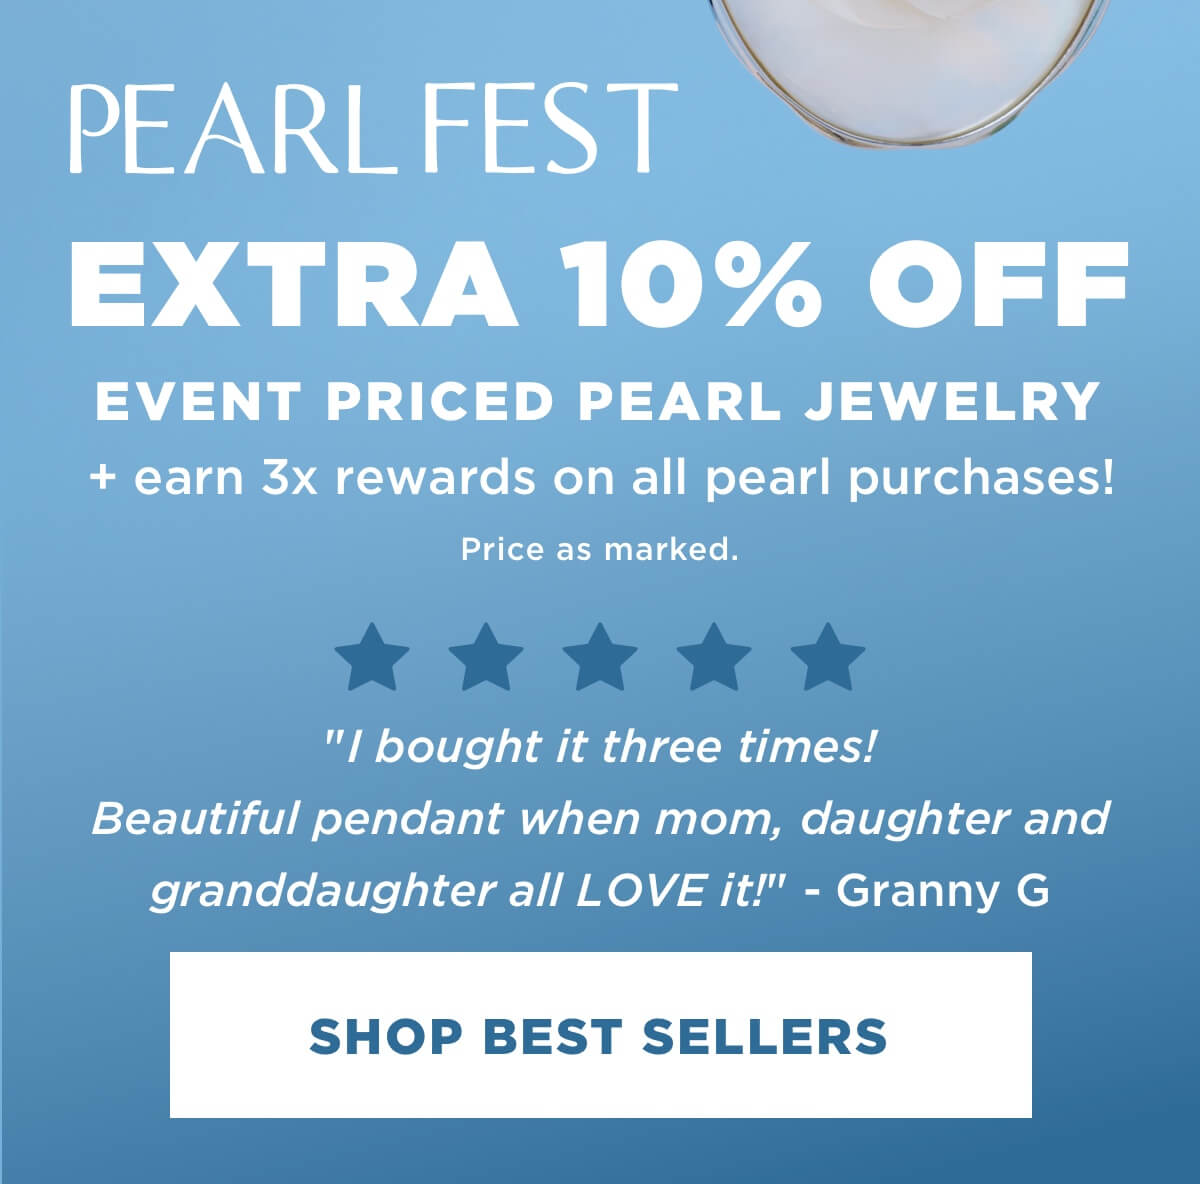 Extra 10% off select styles + 3x rewards on every pearl jewelry purchase